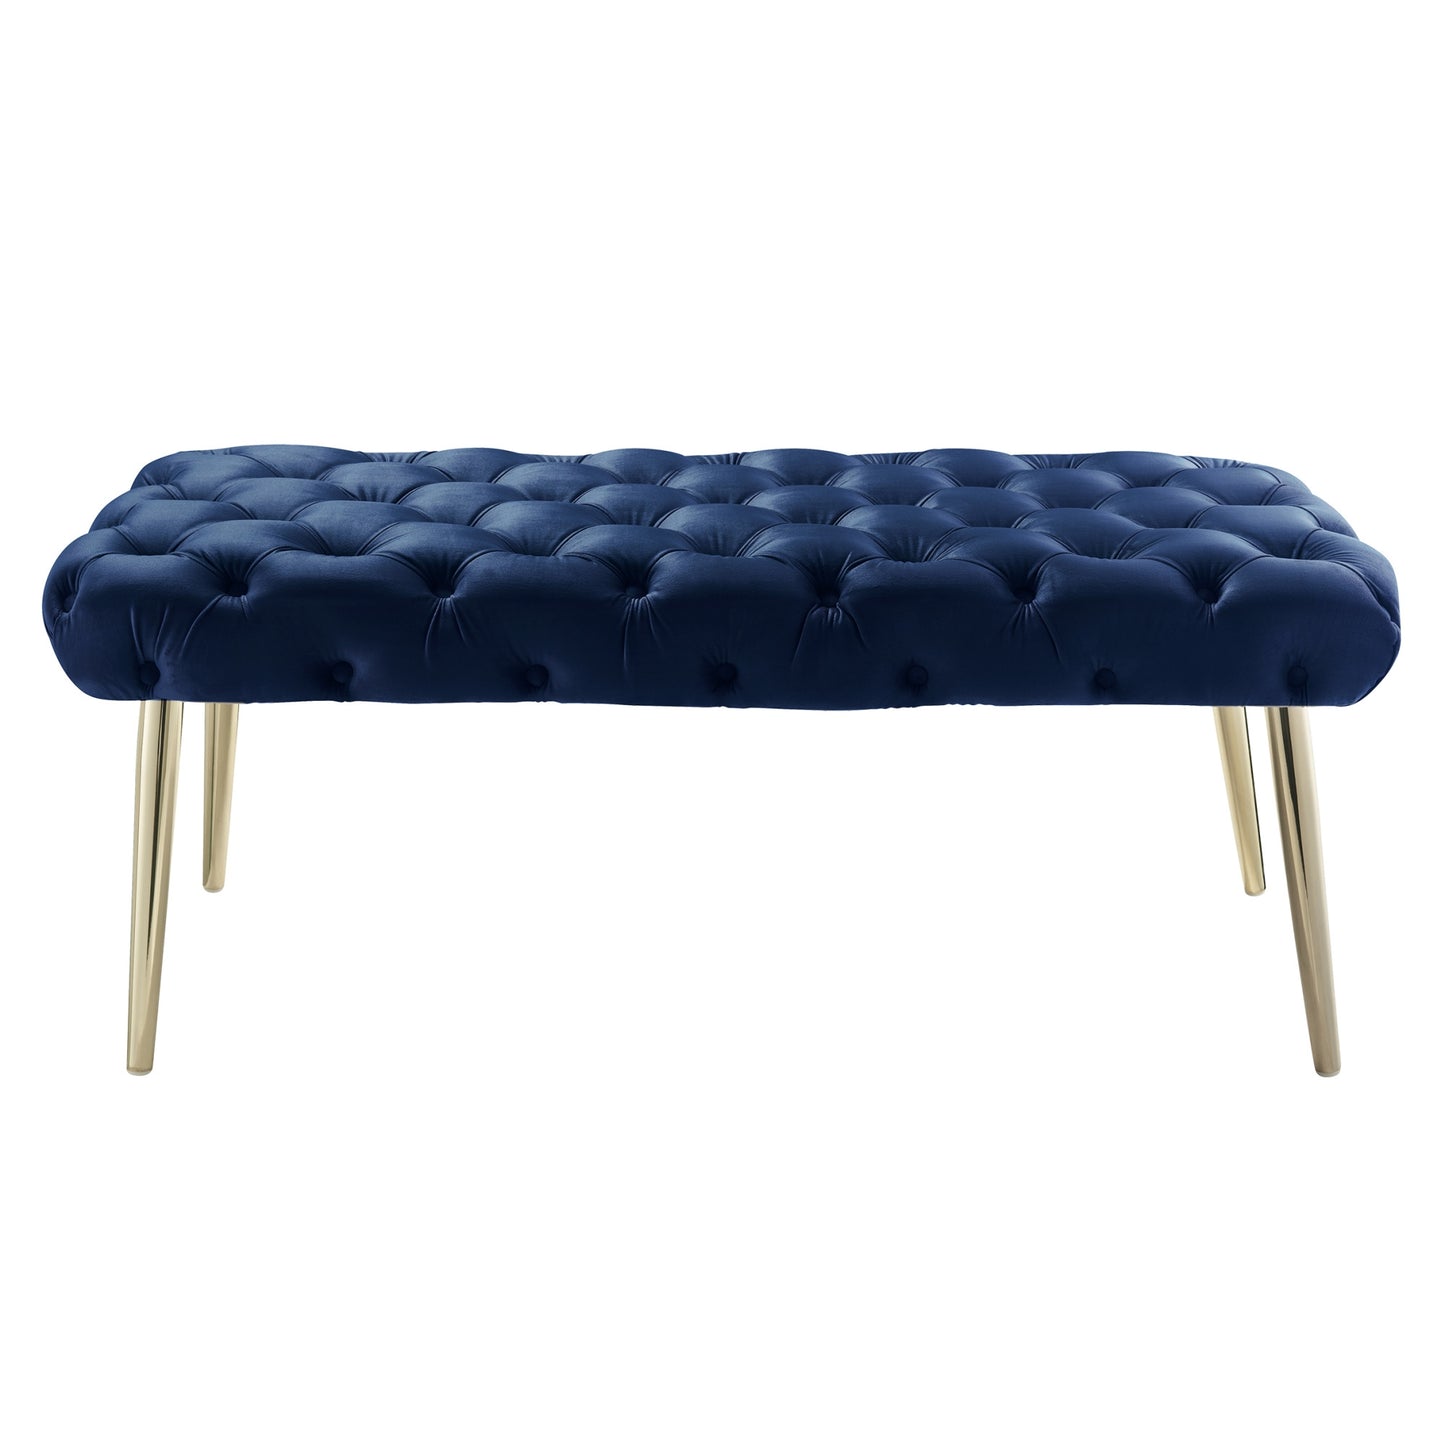 48" Navy Blue And Gold Upholstered Velvet Bench By Homeroots